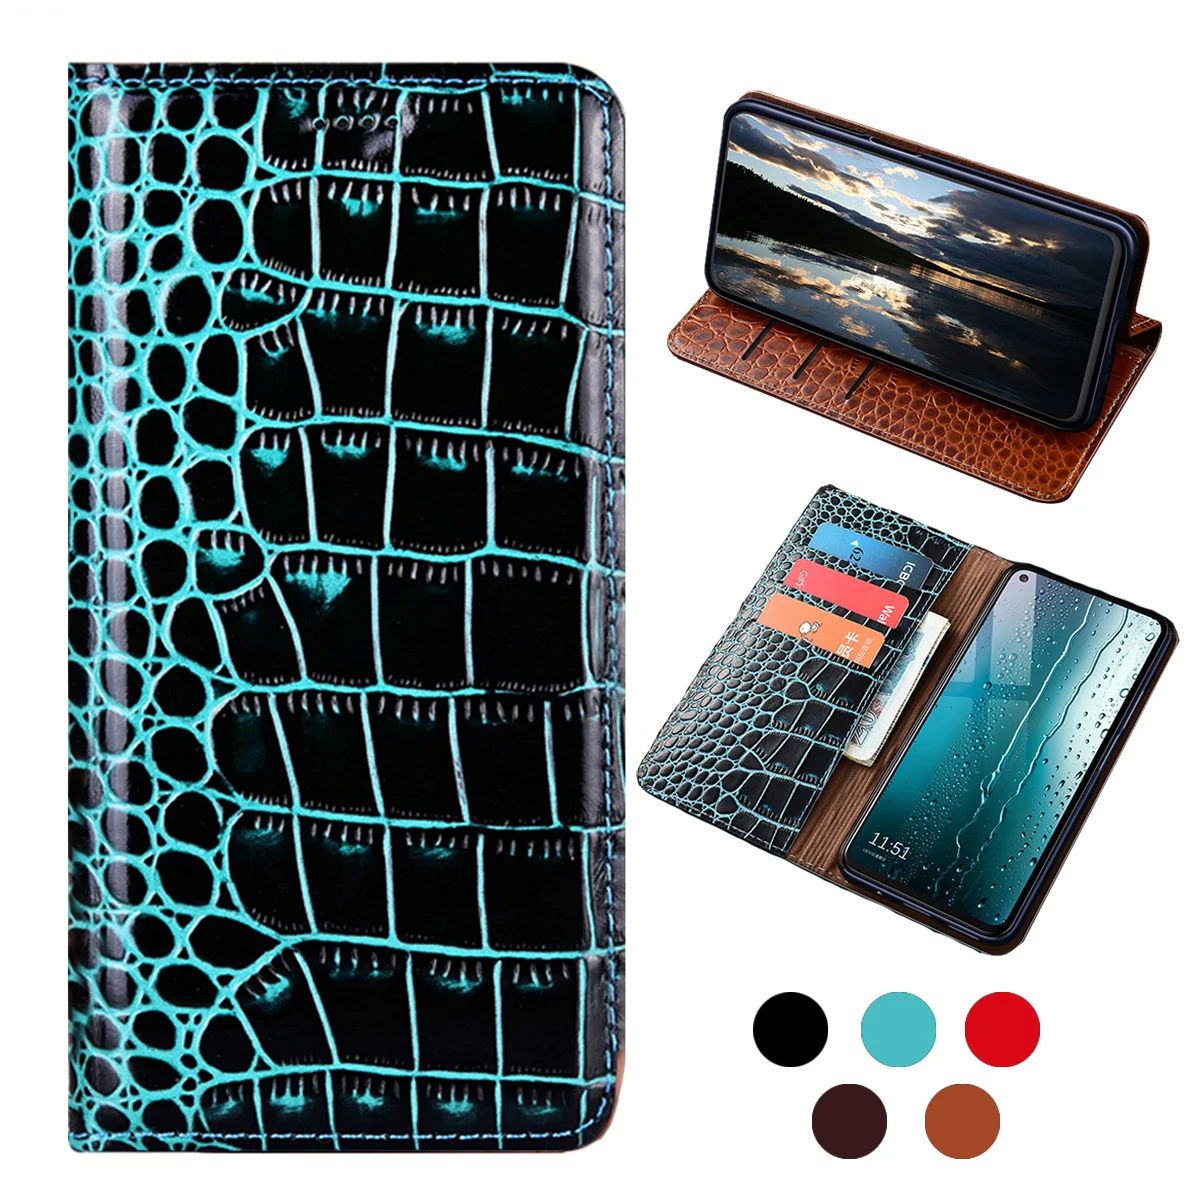 

Luxury Wallet Genuine Leather Flip Phone Case For Nokia 1 7 Plus 2 3 5 8 Sirocco 9 PureView 6 2018 Crocodile Texture Cover Case